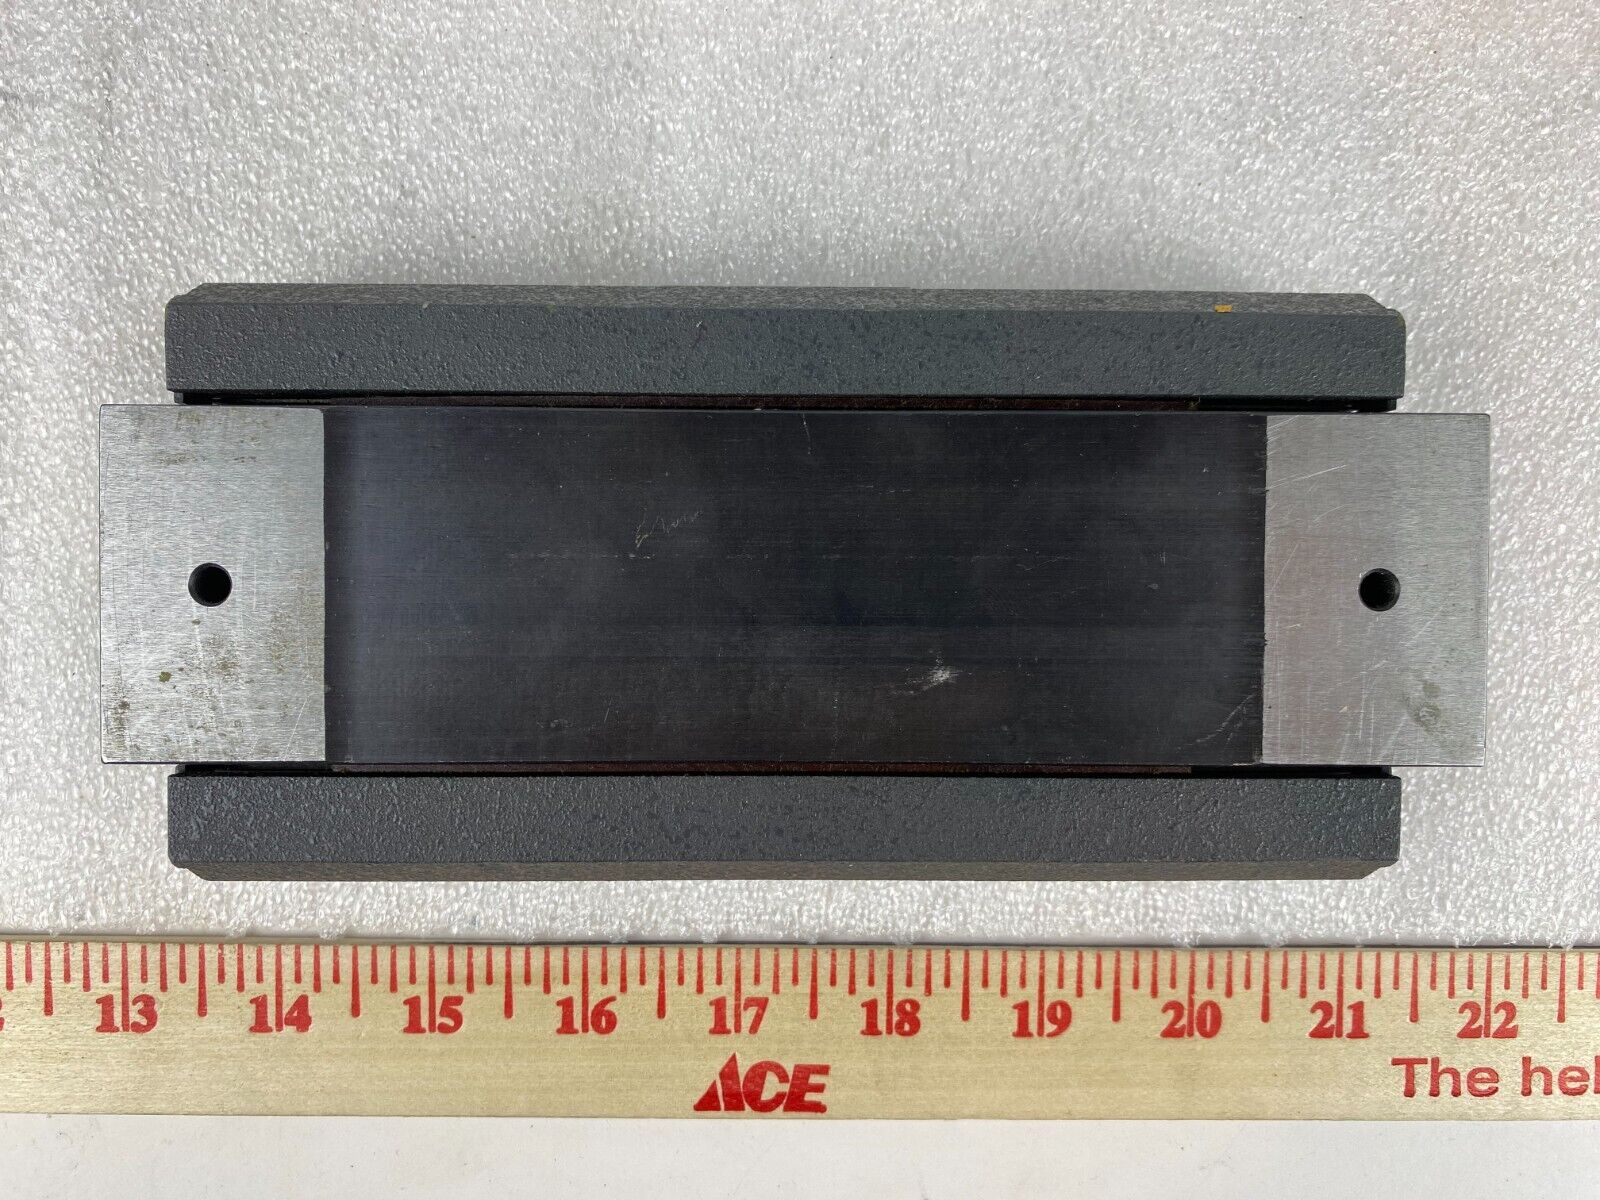 BALL-SLIDE AUTOMATION GAGES 3" X 7" LINEAR MANUAL MOTION STAGE